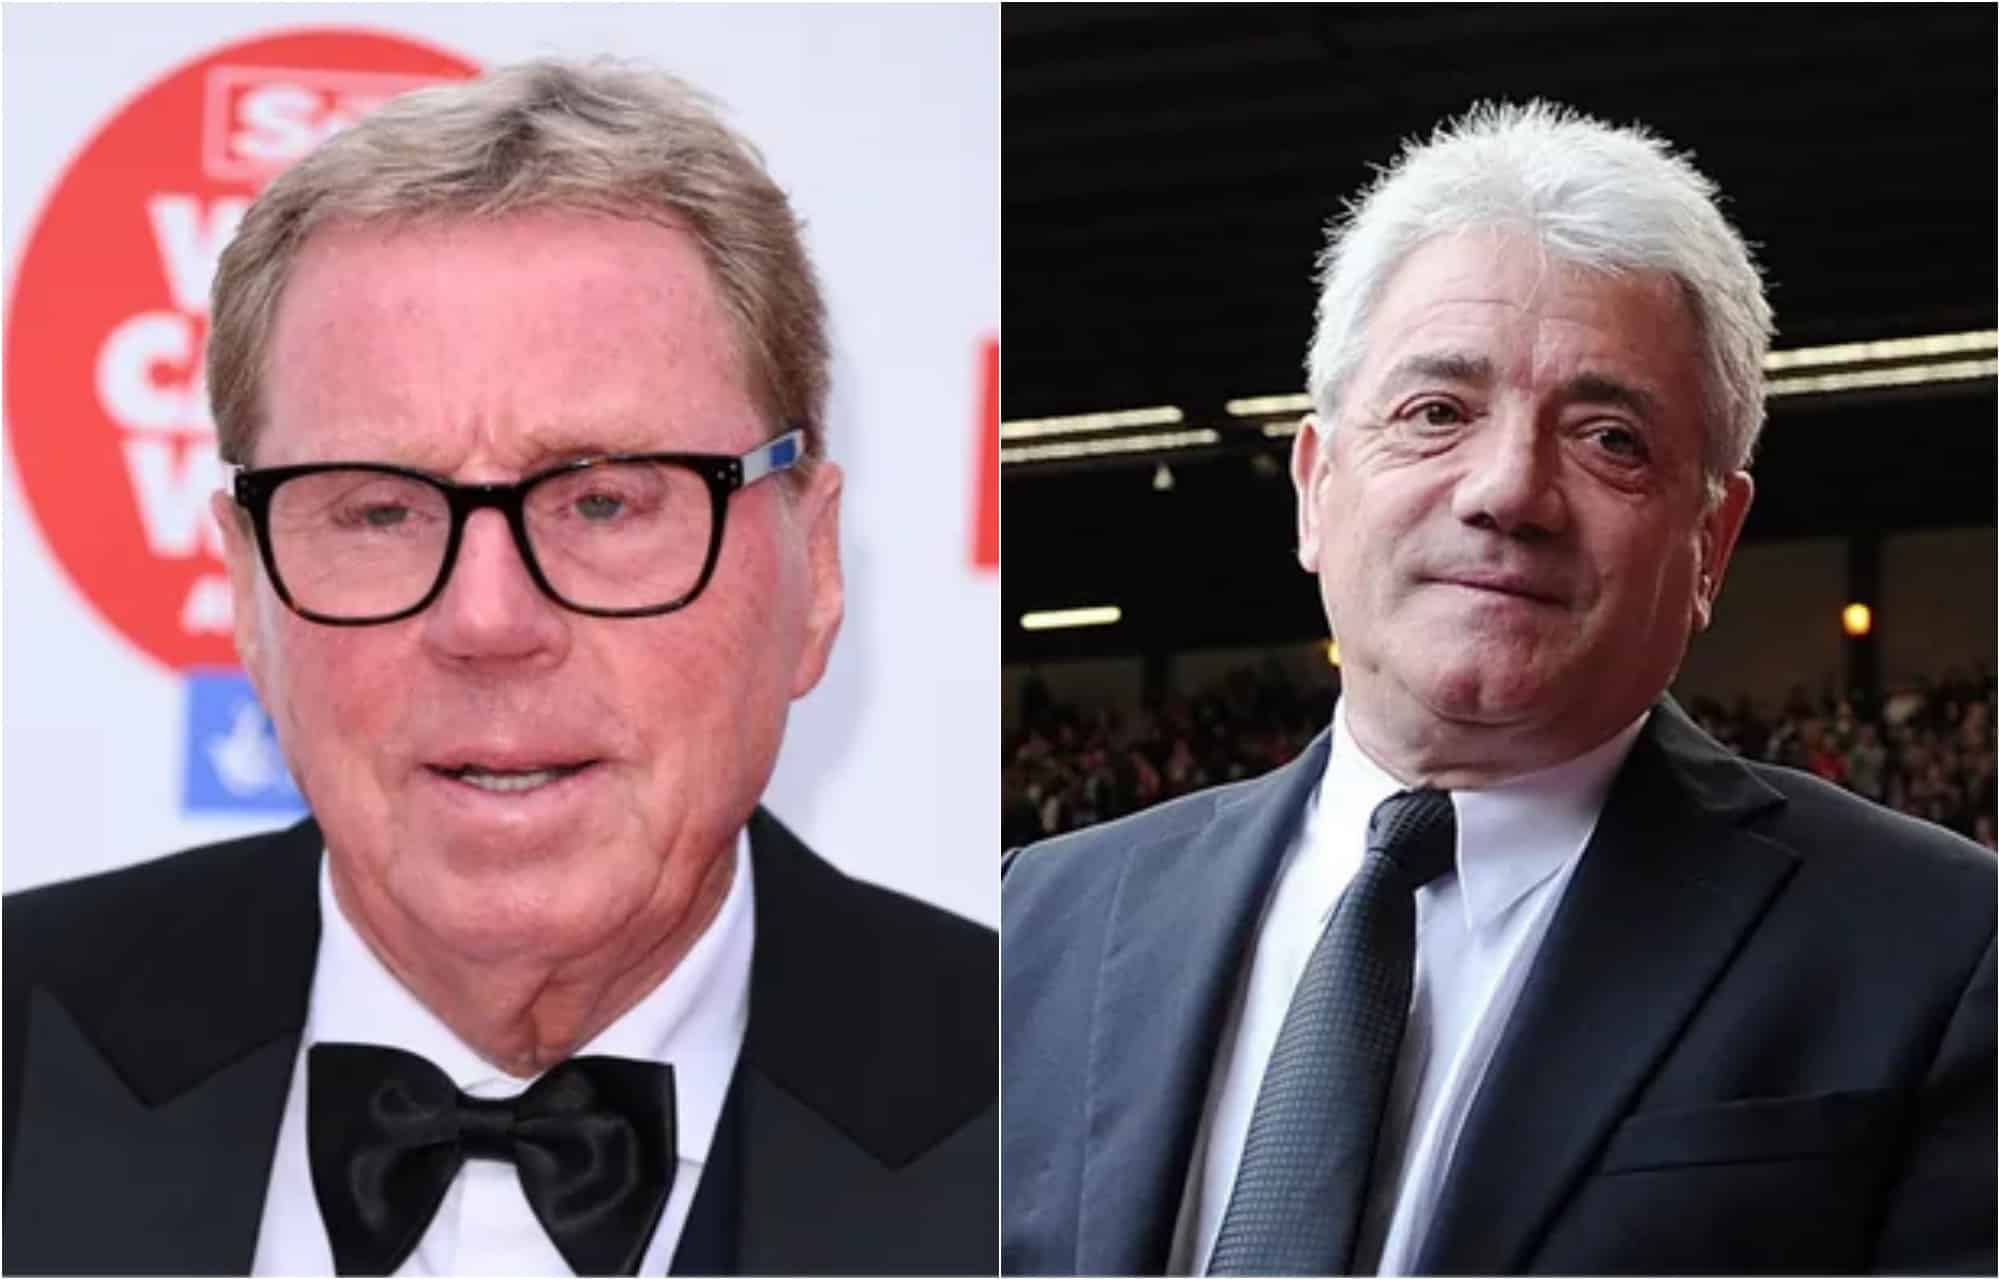 Harry Redknapp says Kevin Keegan is ‘brave’ over ‘lady footballers’ comment